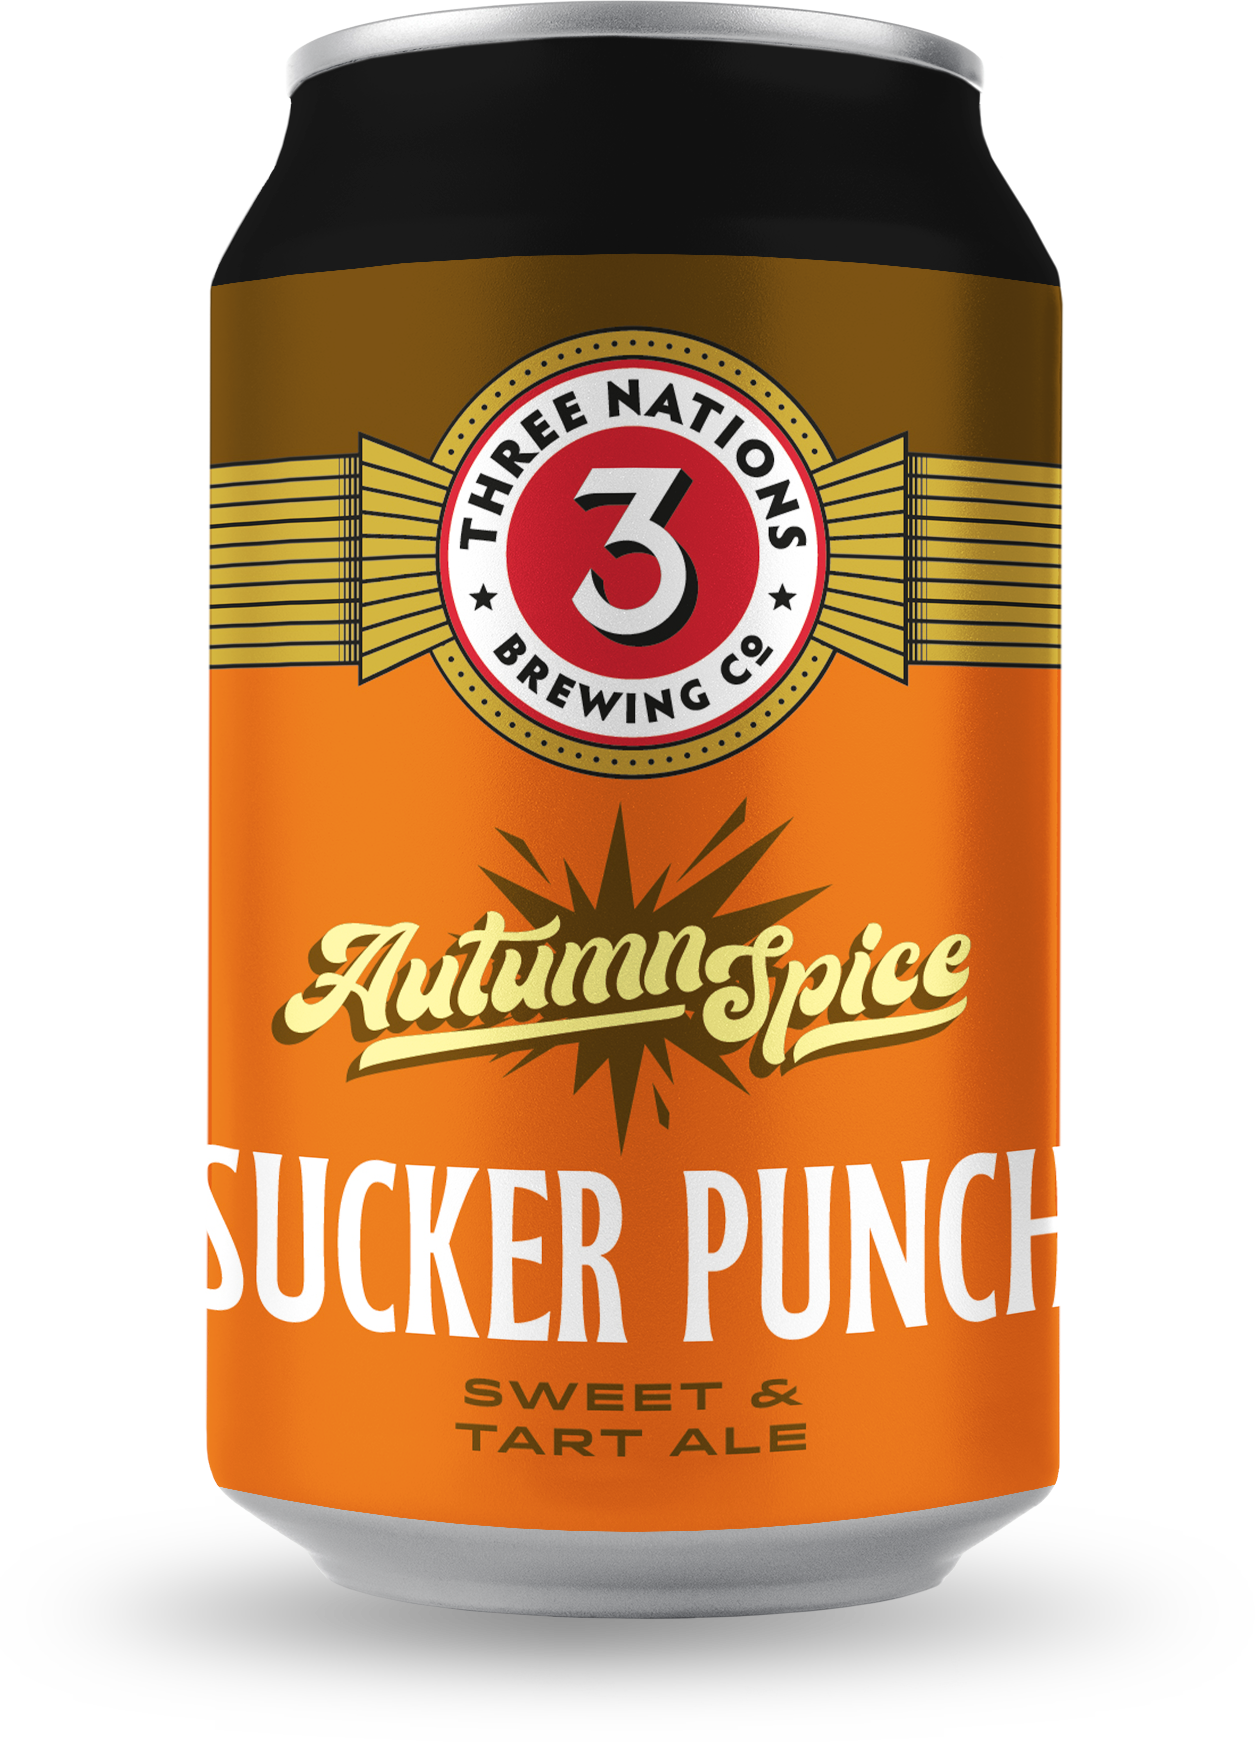 3 Nations Brewing's Autumn Spice can design